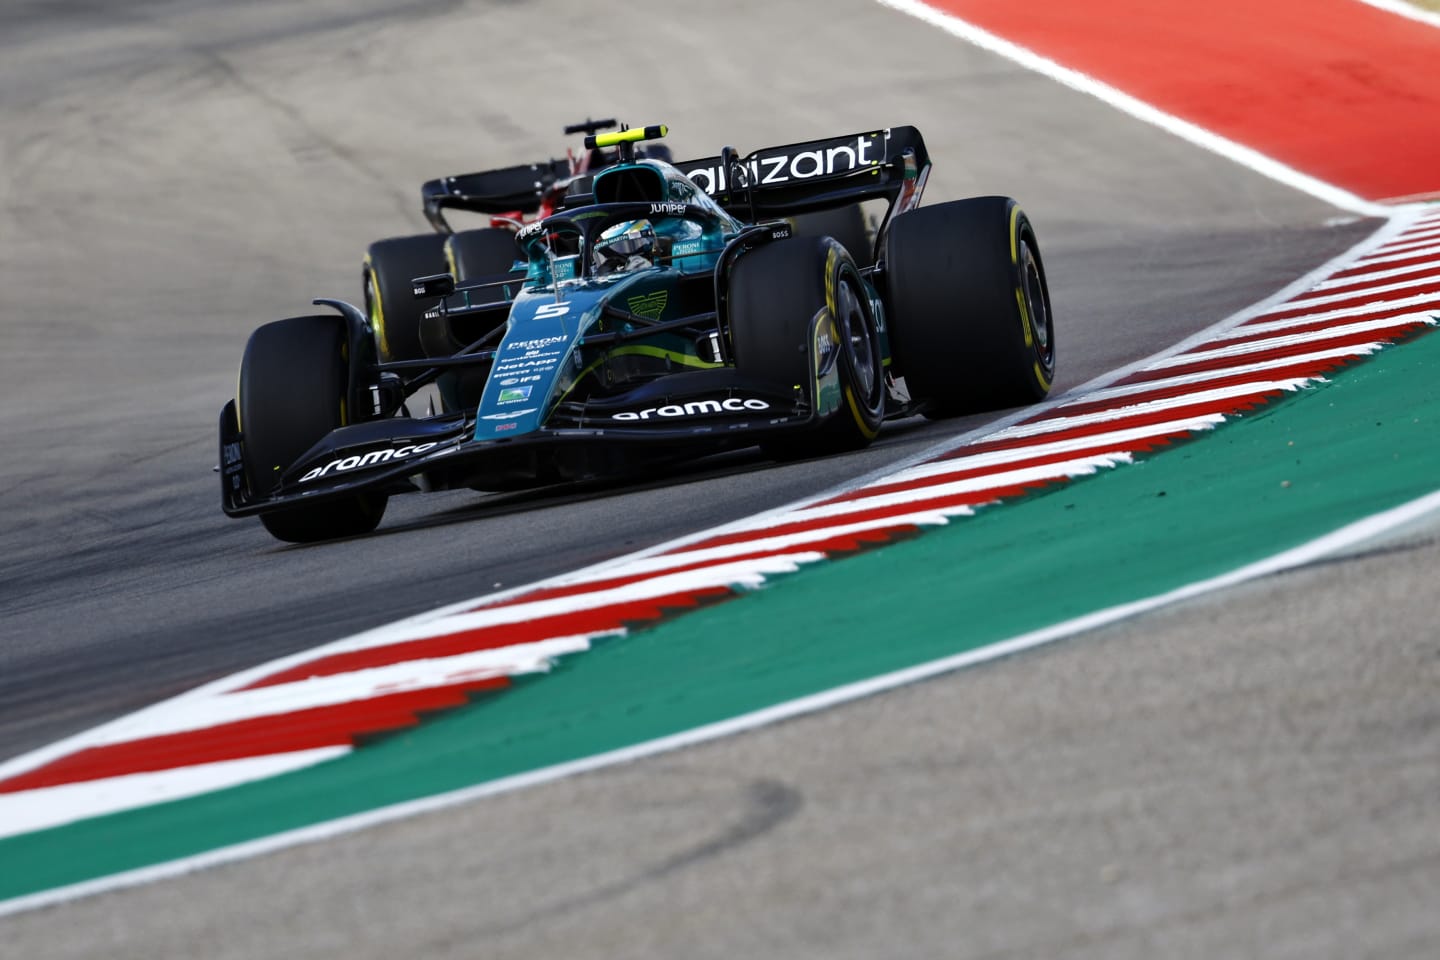 AUSTIN, TEXAS - OCTOBER 23: Sebastian Vettel of Germany driving the (5) Aston Martin AMR22 Mercedes on track during the F1 Grand Prix of USA at Circuit of The Americas on October 23, 2022 in Austin, Texas. (Photo by Chris Graythen/Getty Images)